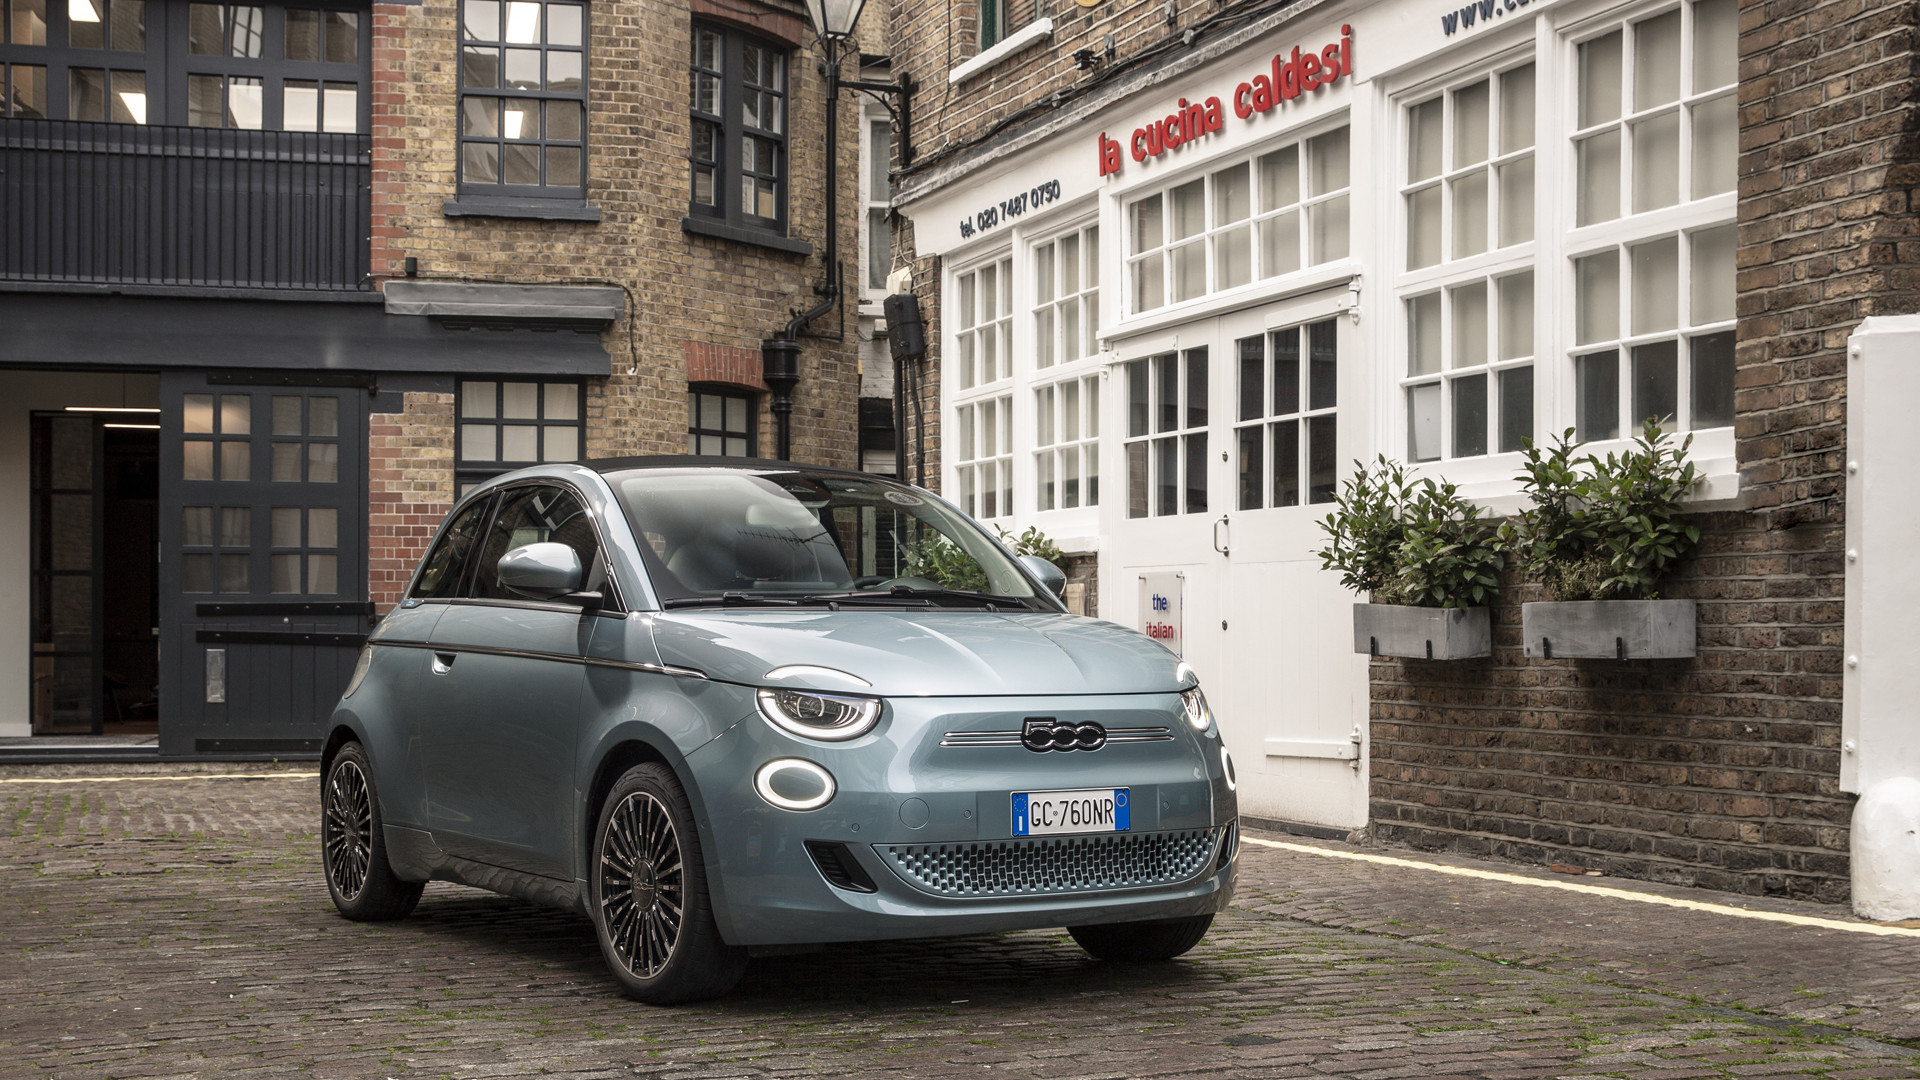 FIAT 500e has been named best electric city car for a second year